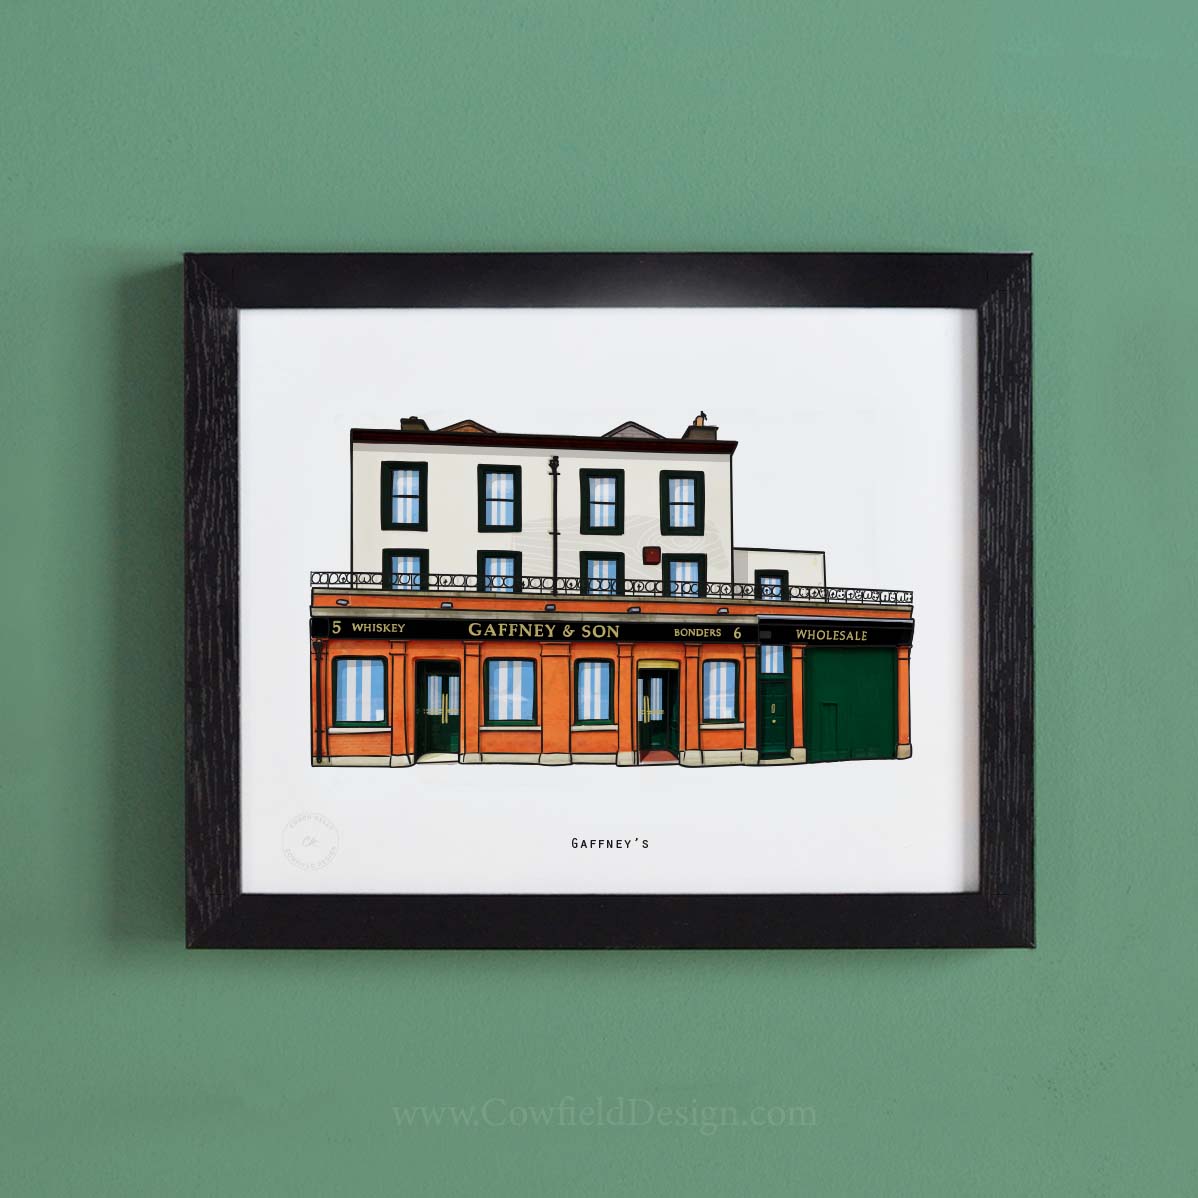 Gaffney’s -Dublin Requested Pubs 4th